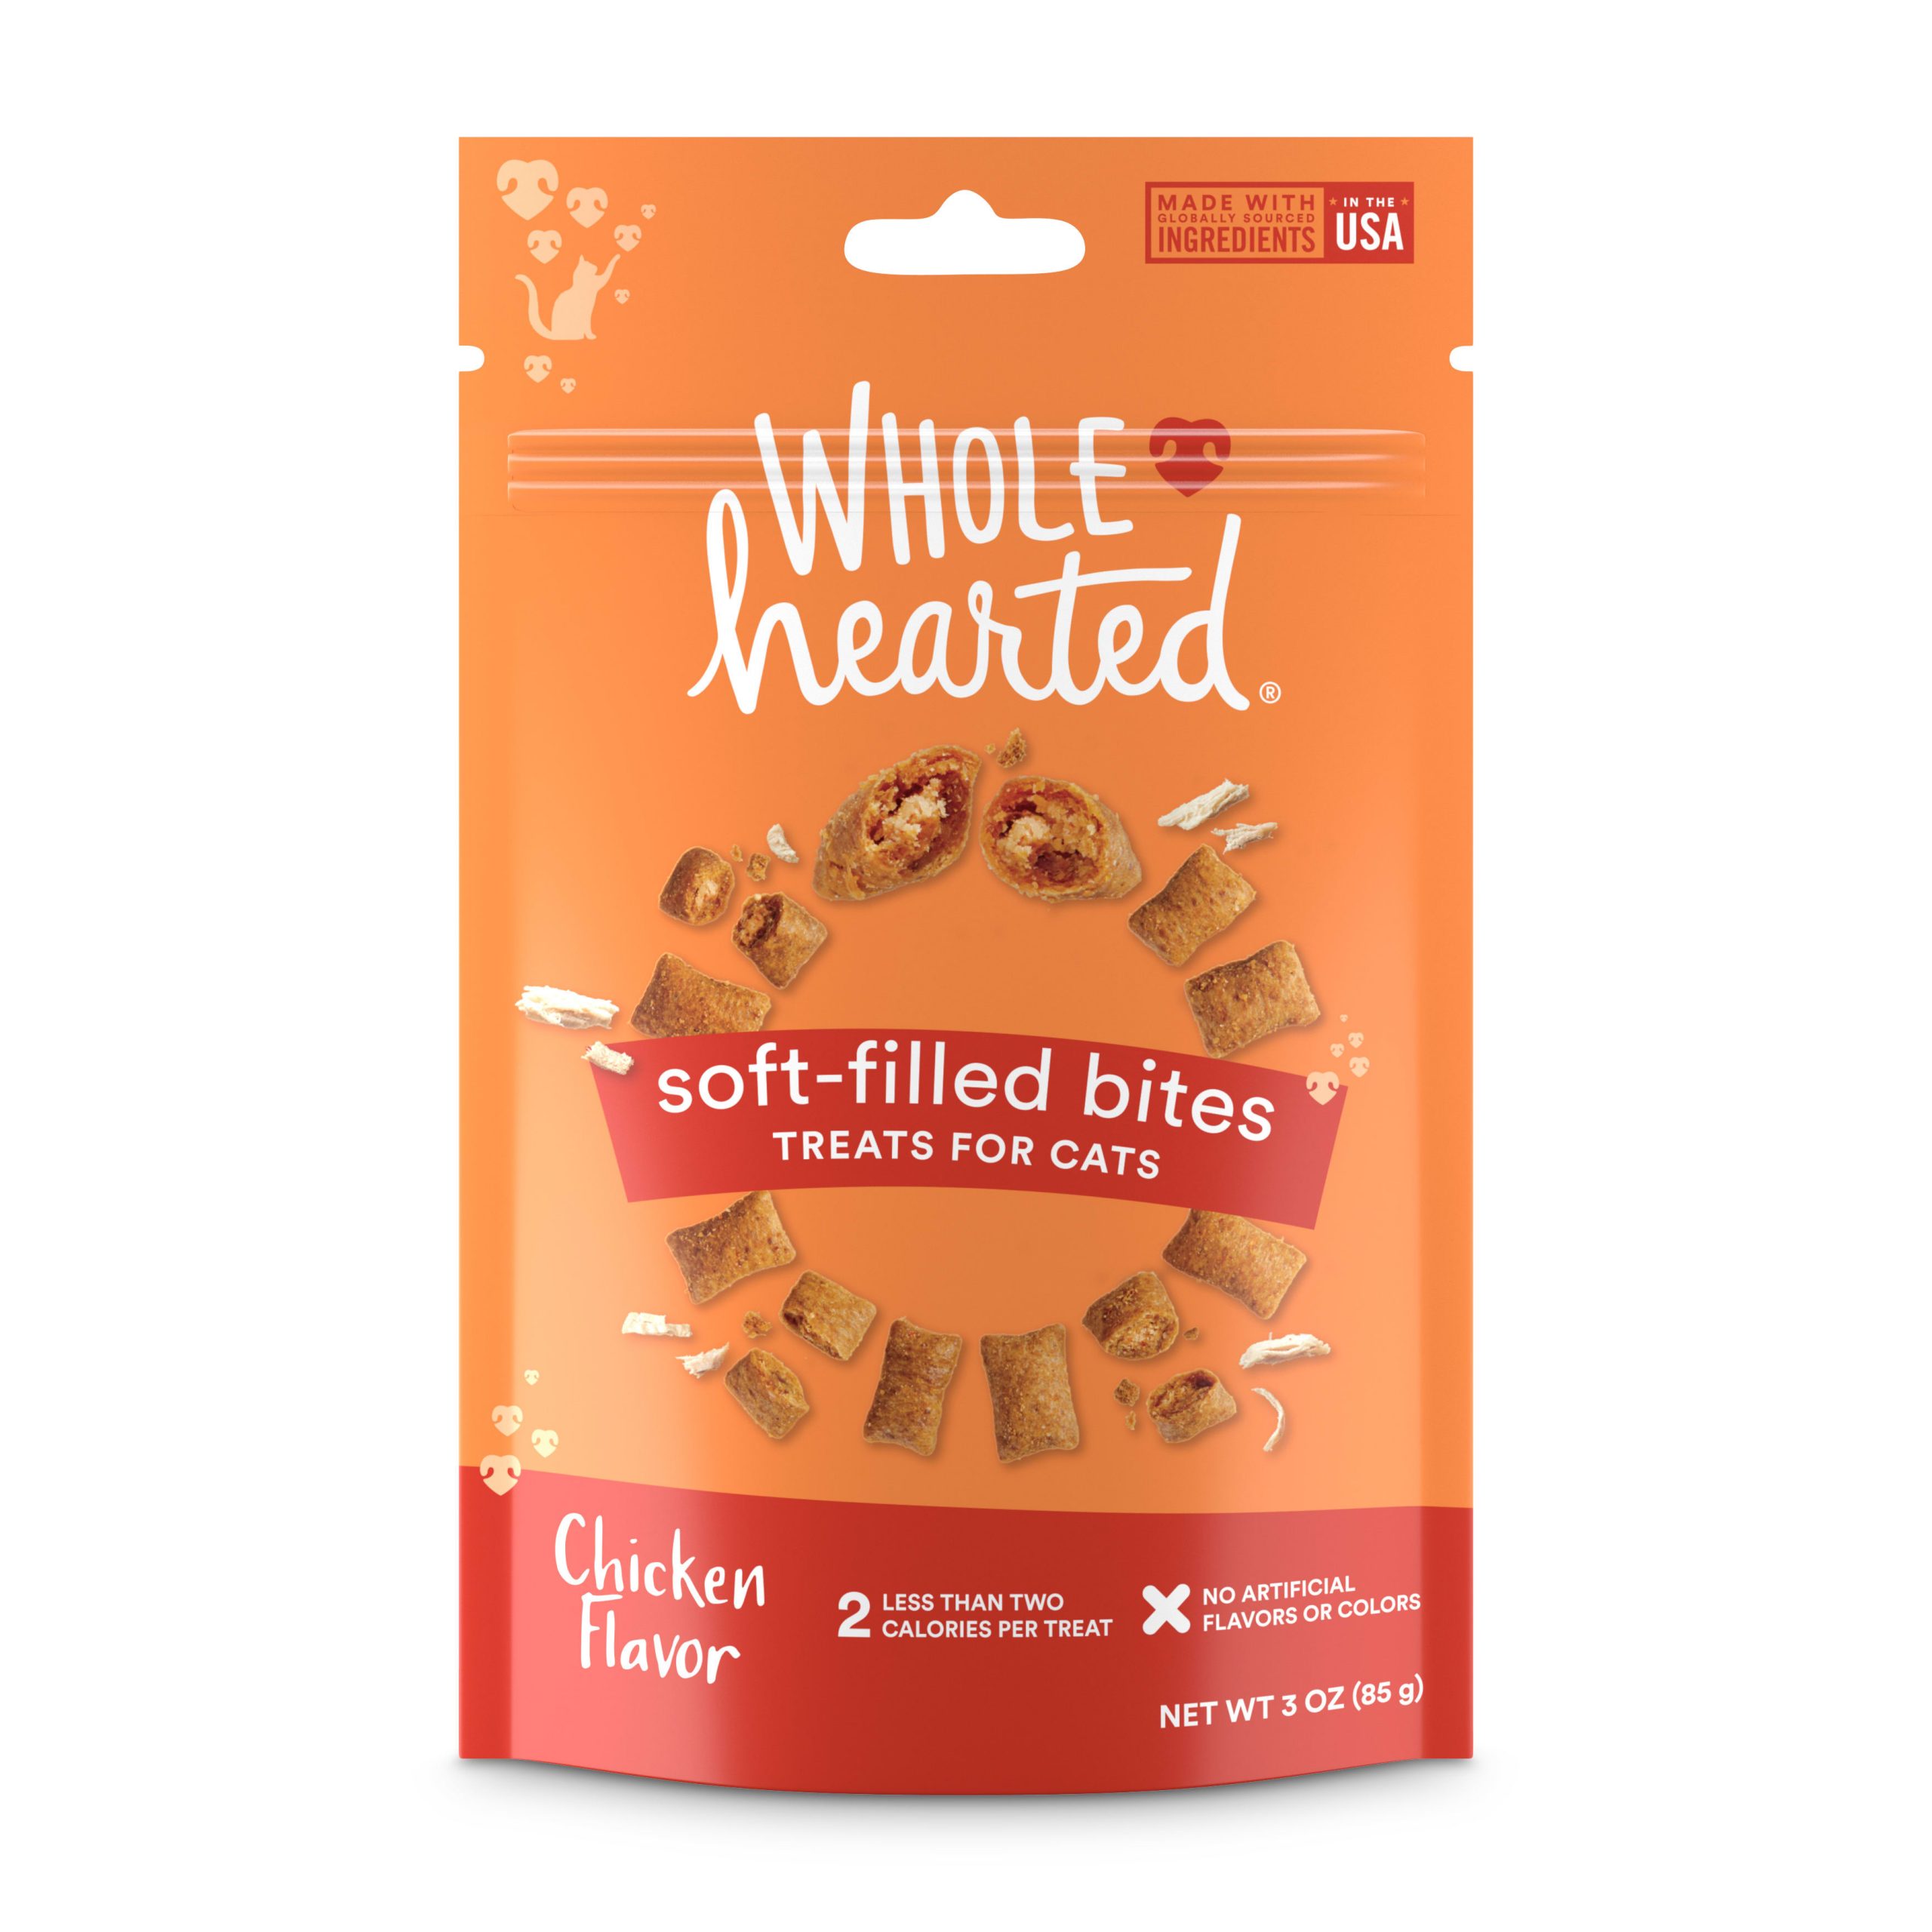 WholeHearted Chicken Flavor Soft-Filled Bites